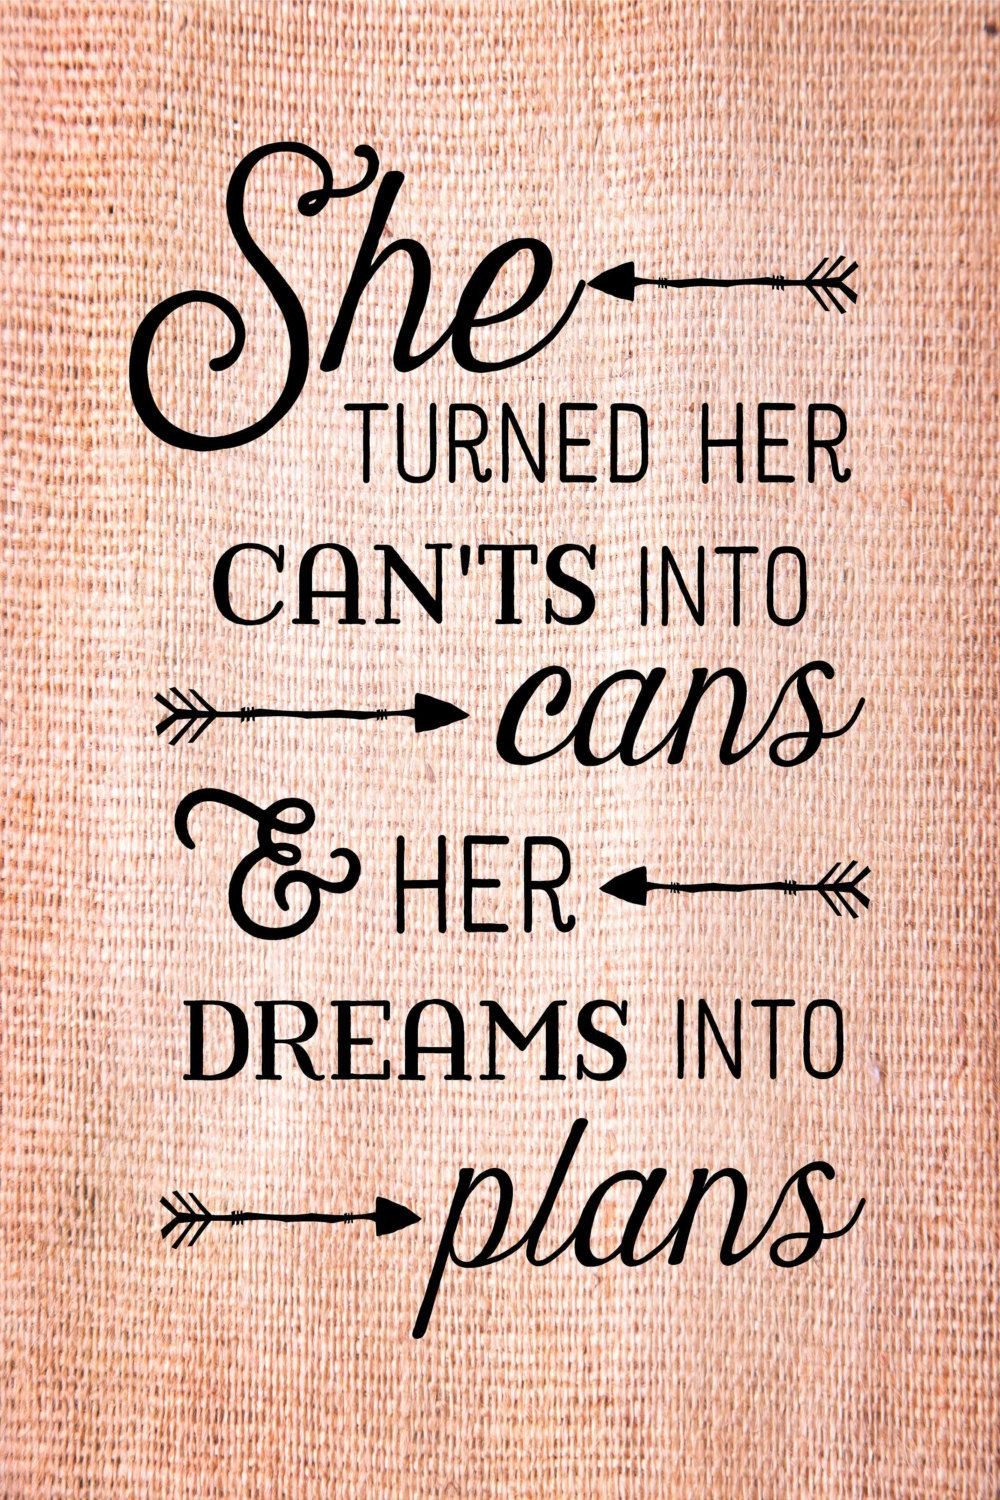 Quotes Graduation
 Graduation Gift She turned her can ts into cans dreams